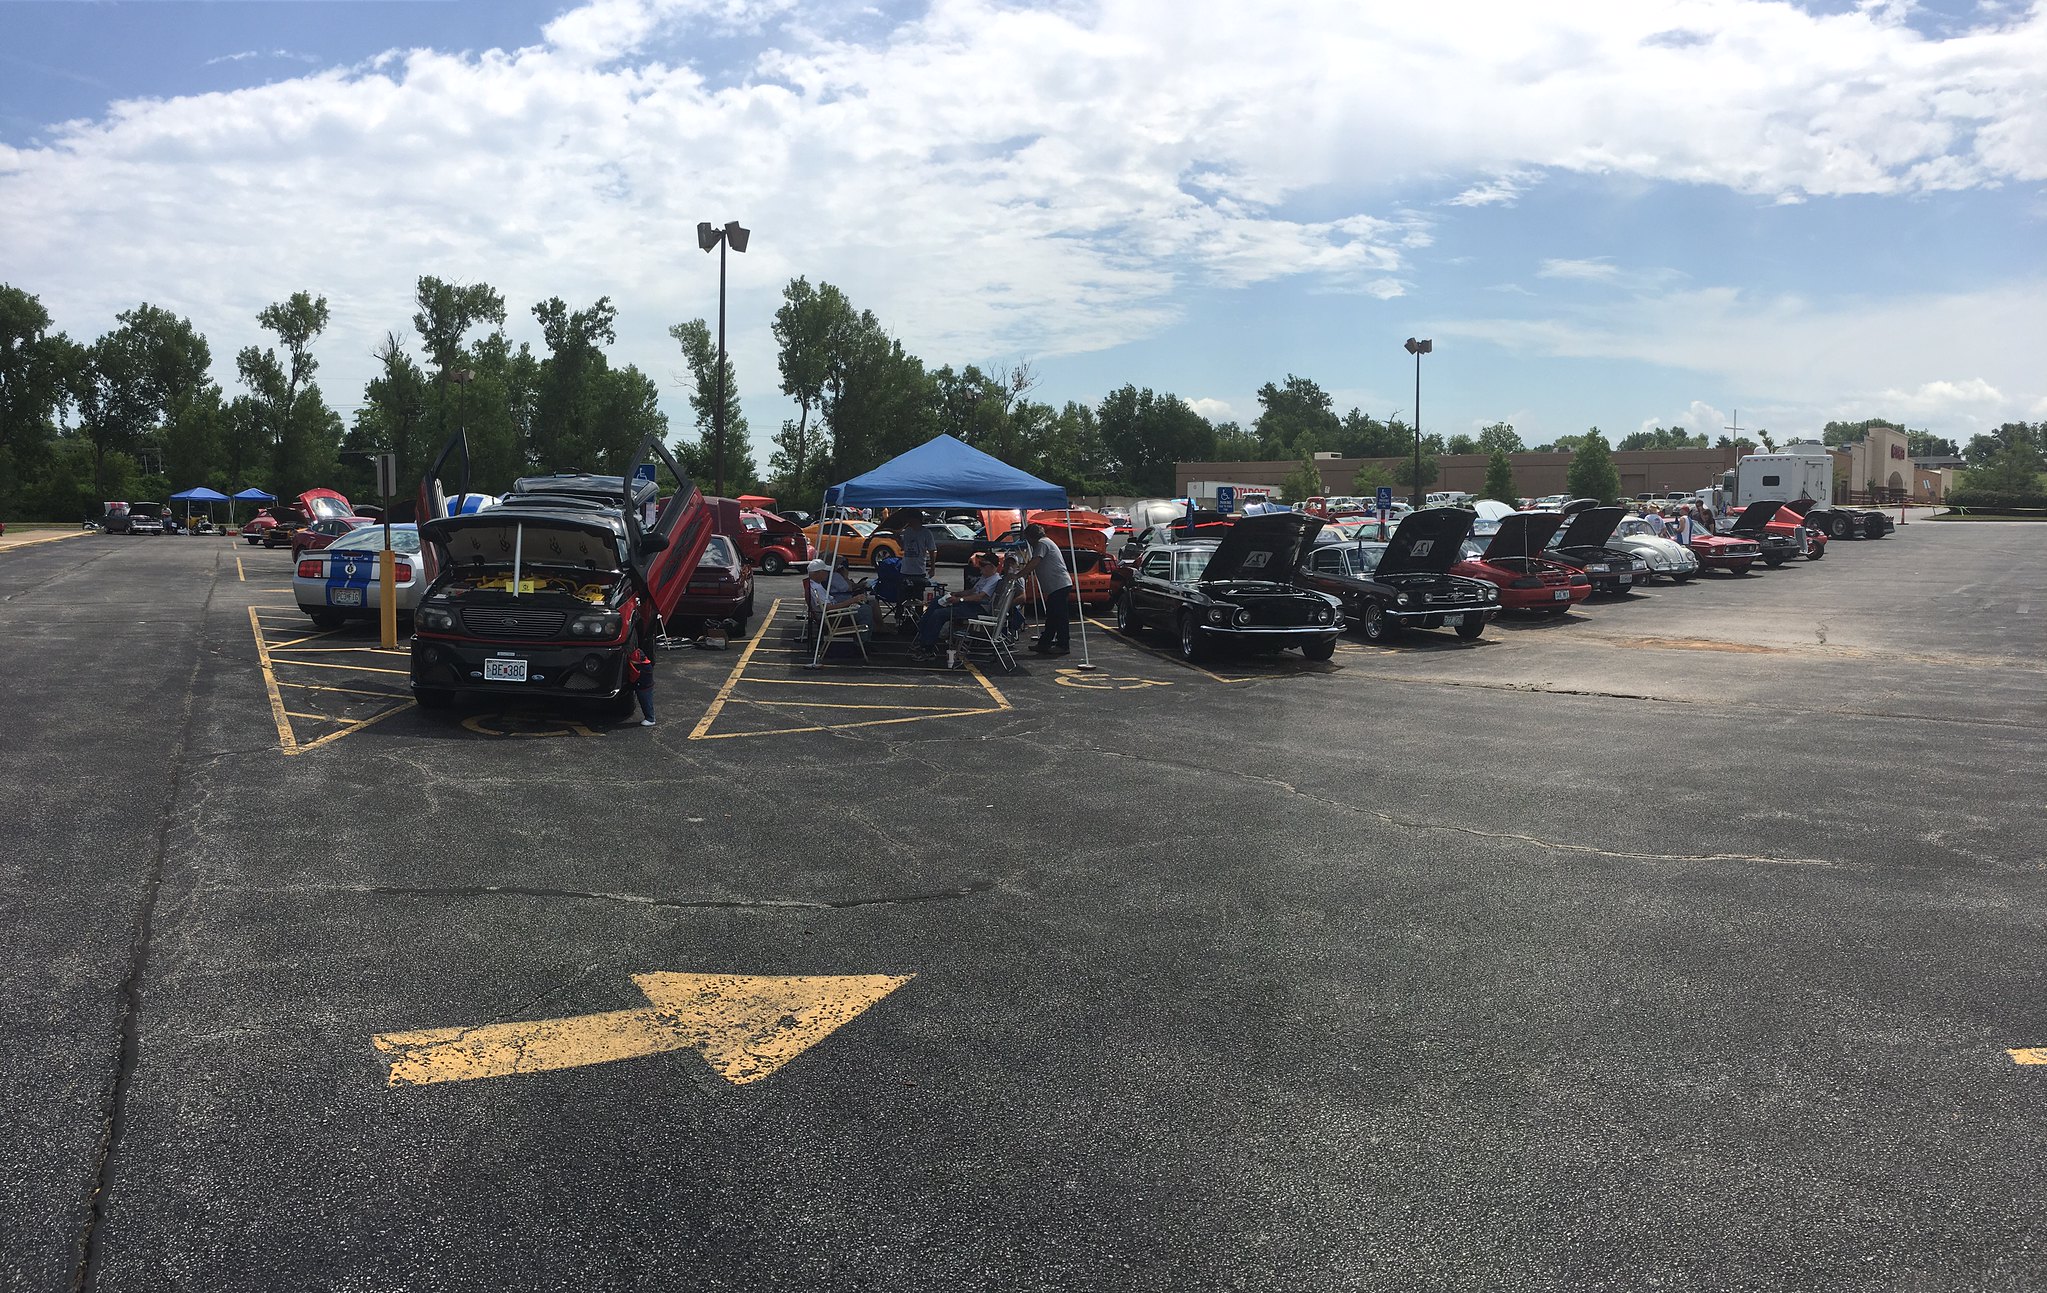 2016 “Rides for Guides” Classic Car Show